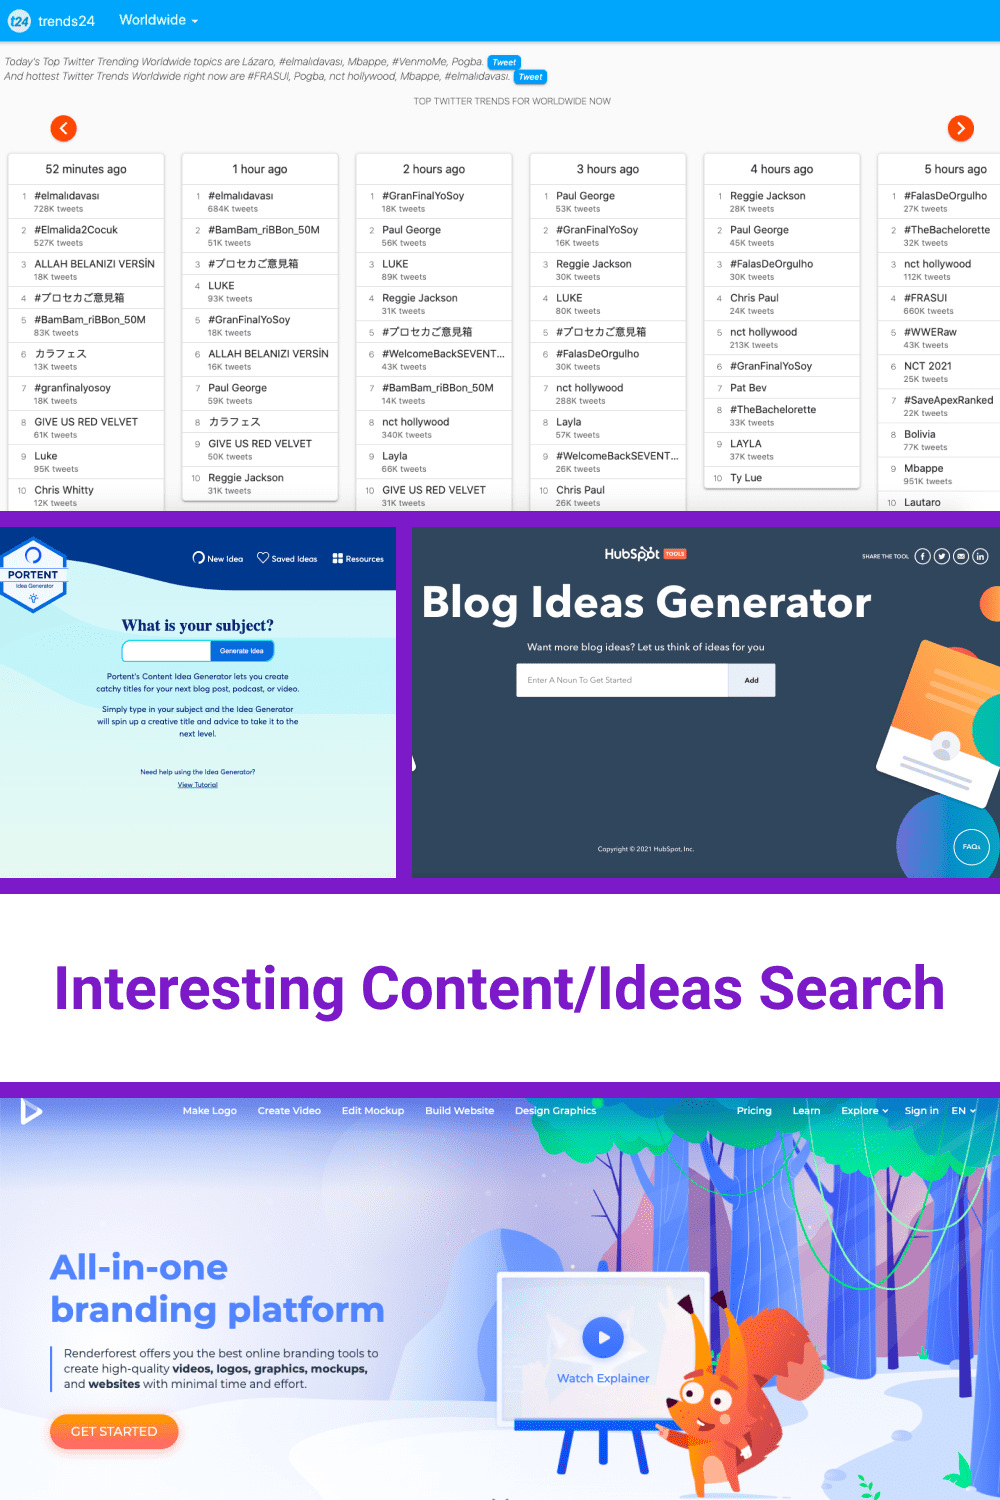 Interesting Content/Ideas Search.